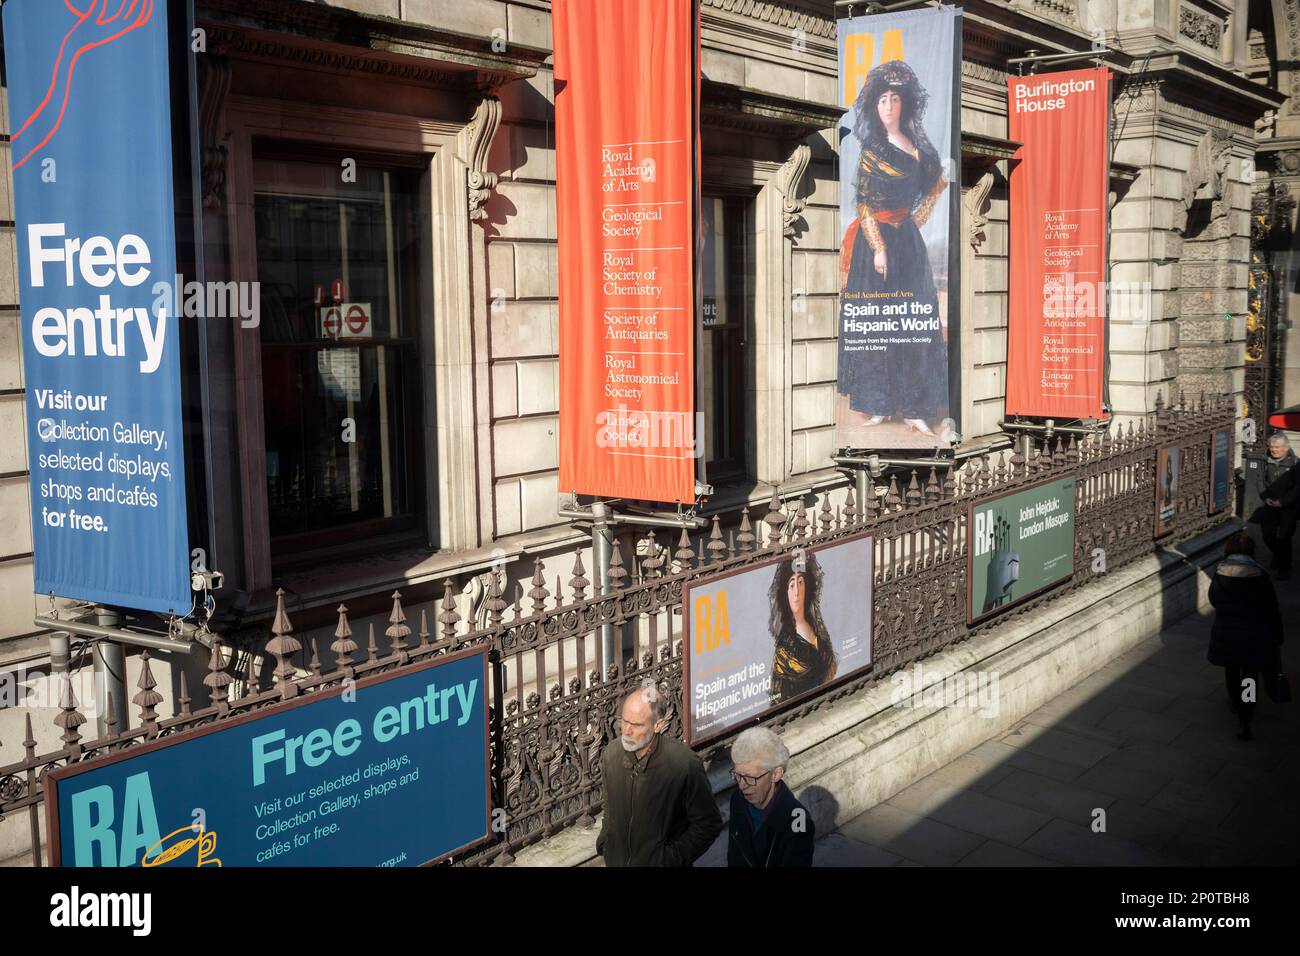 Banners hang outside the Royal Academy on Piccadilly, publicising the current 'Spain And the Hispanic World' exhibition at the capital's Arts insitution, on 2nd March 2023, in London, England. Stock Photo